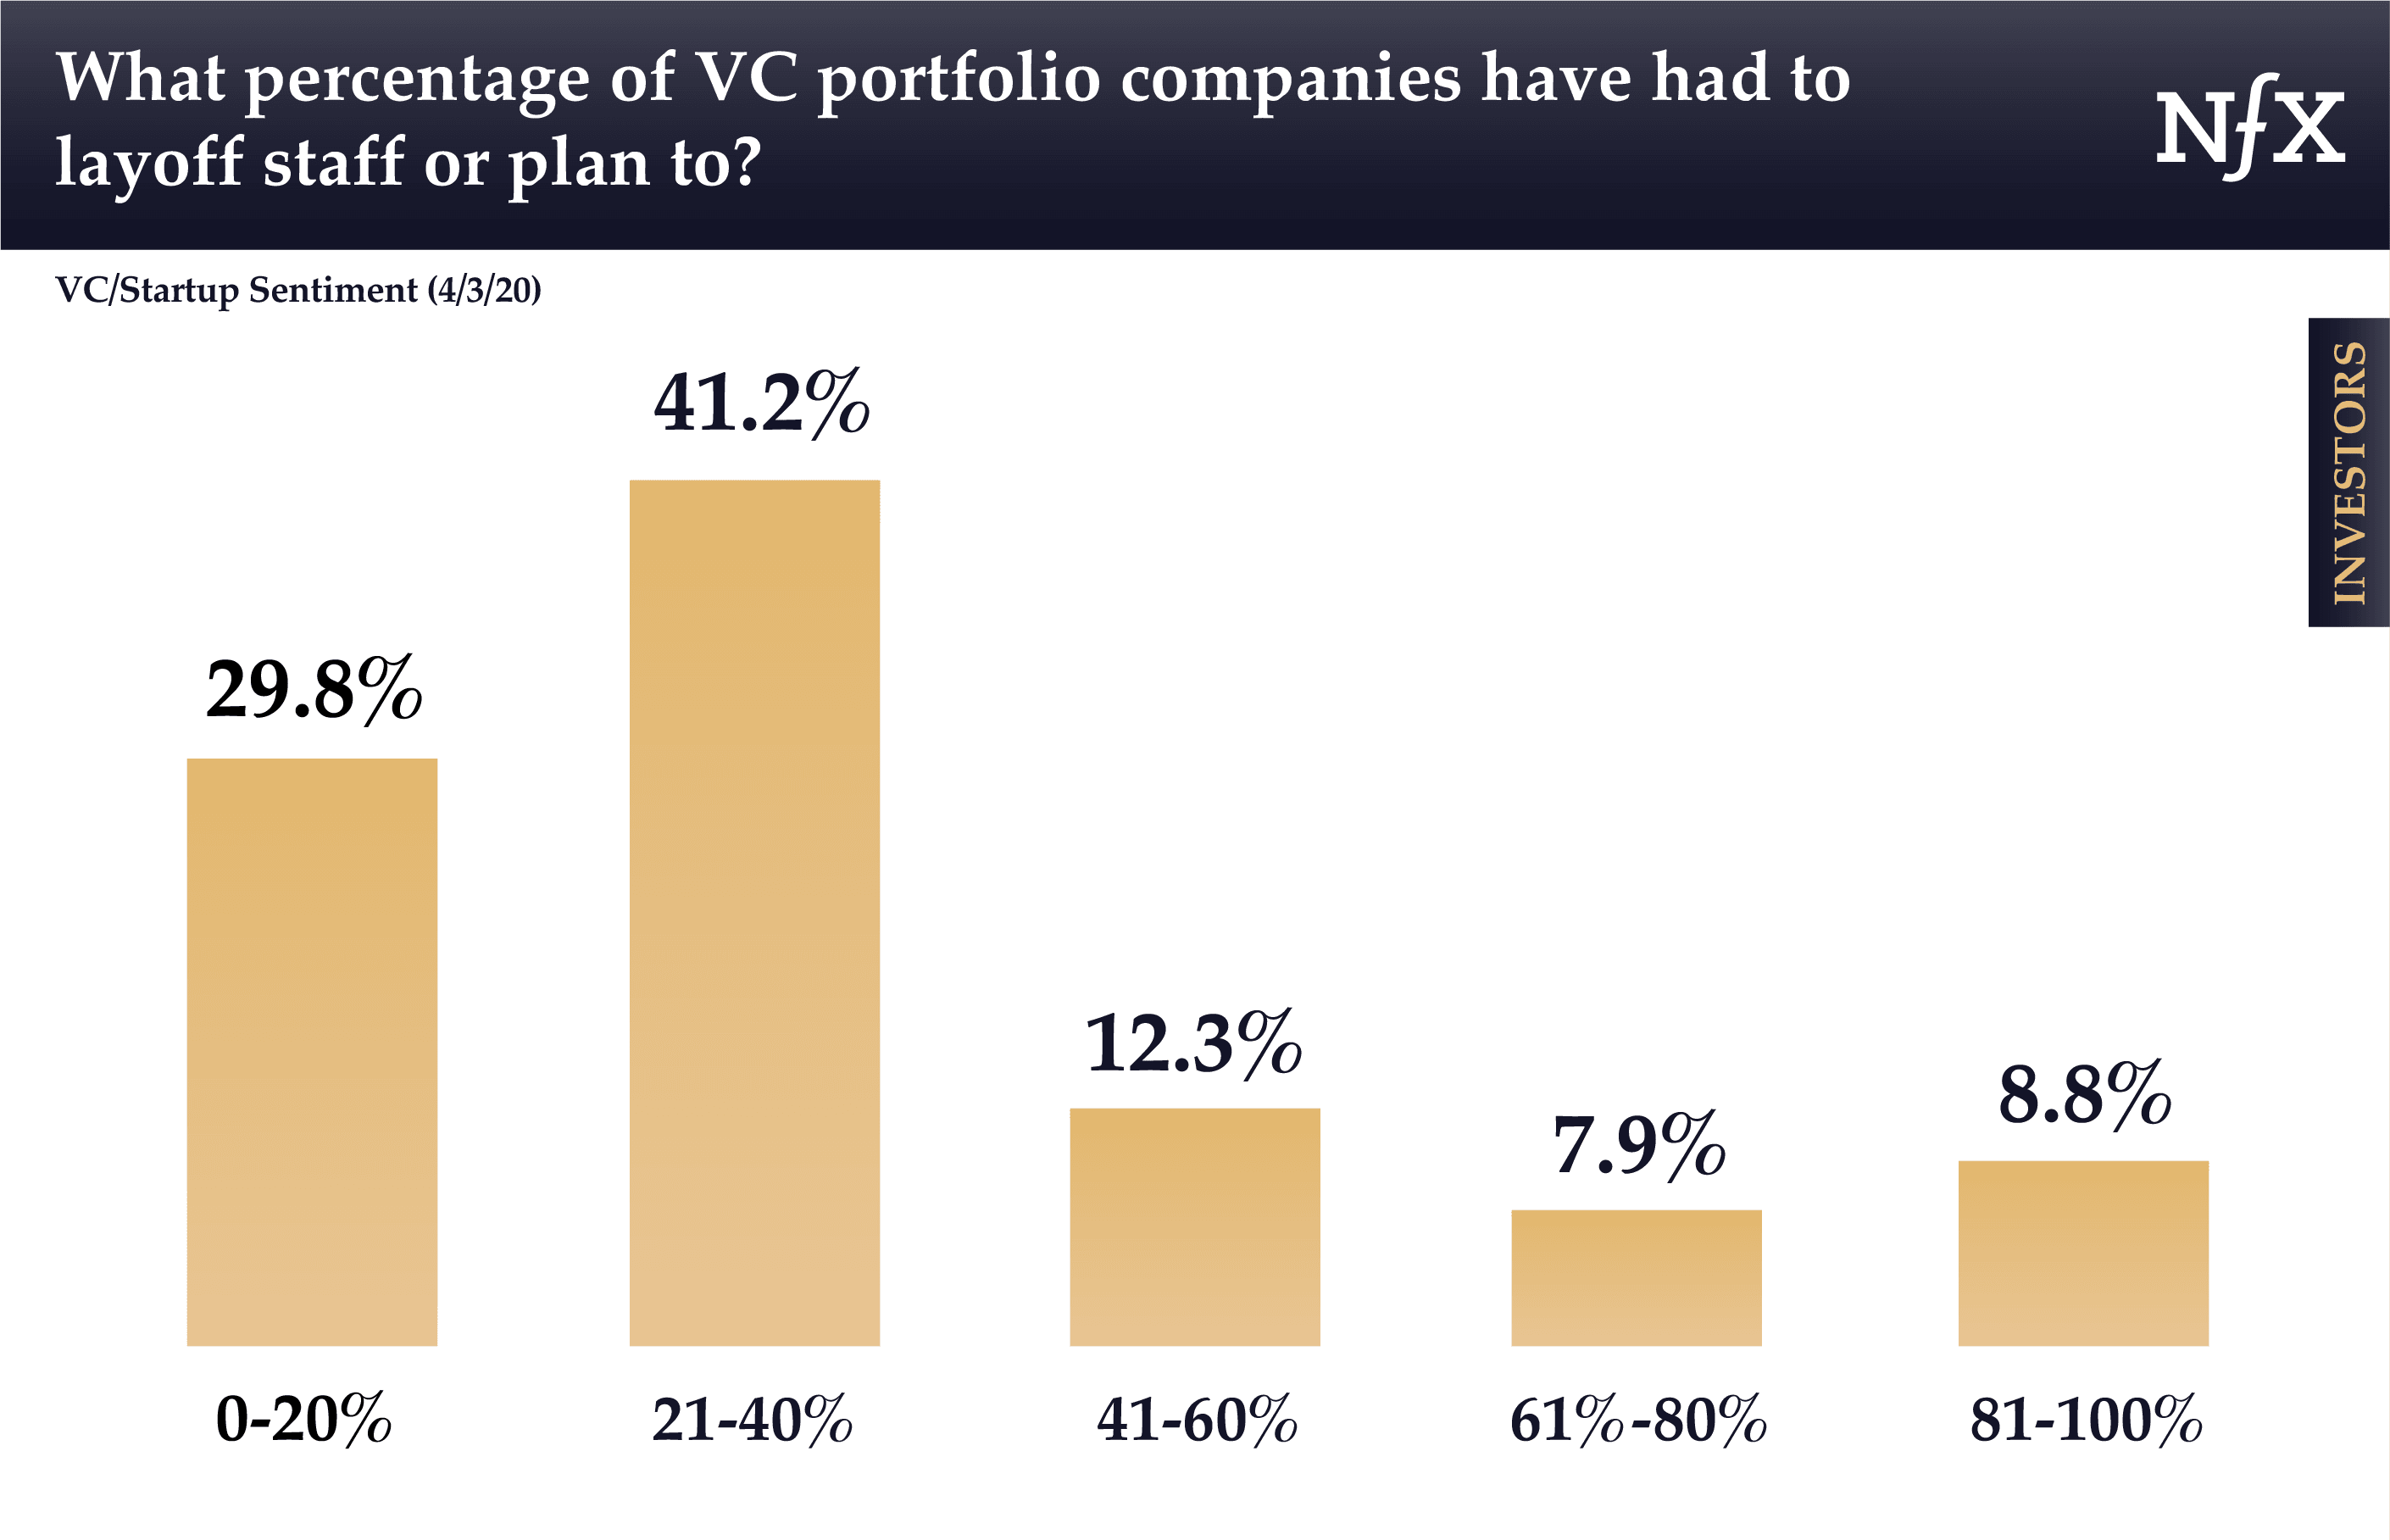 What percent of VC companies had to layoff employees during COVID-19?